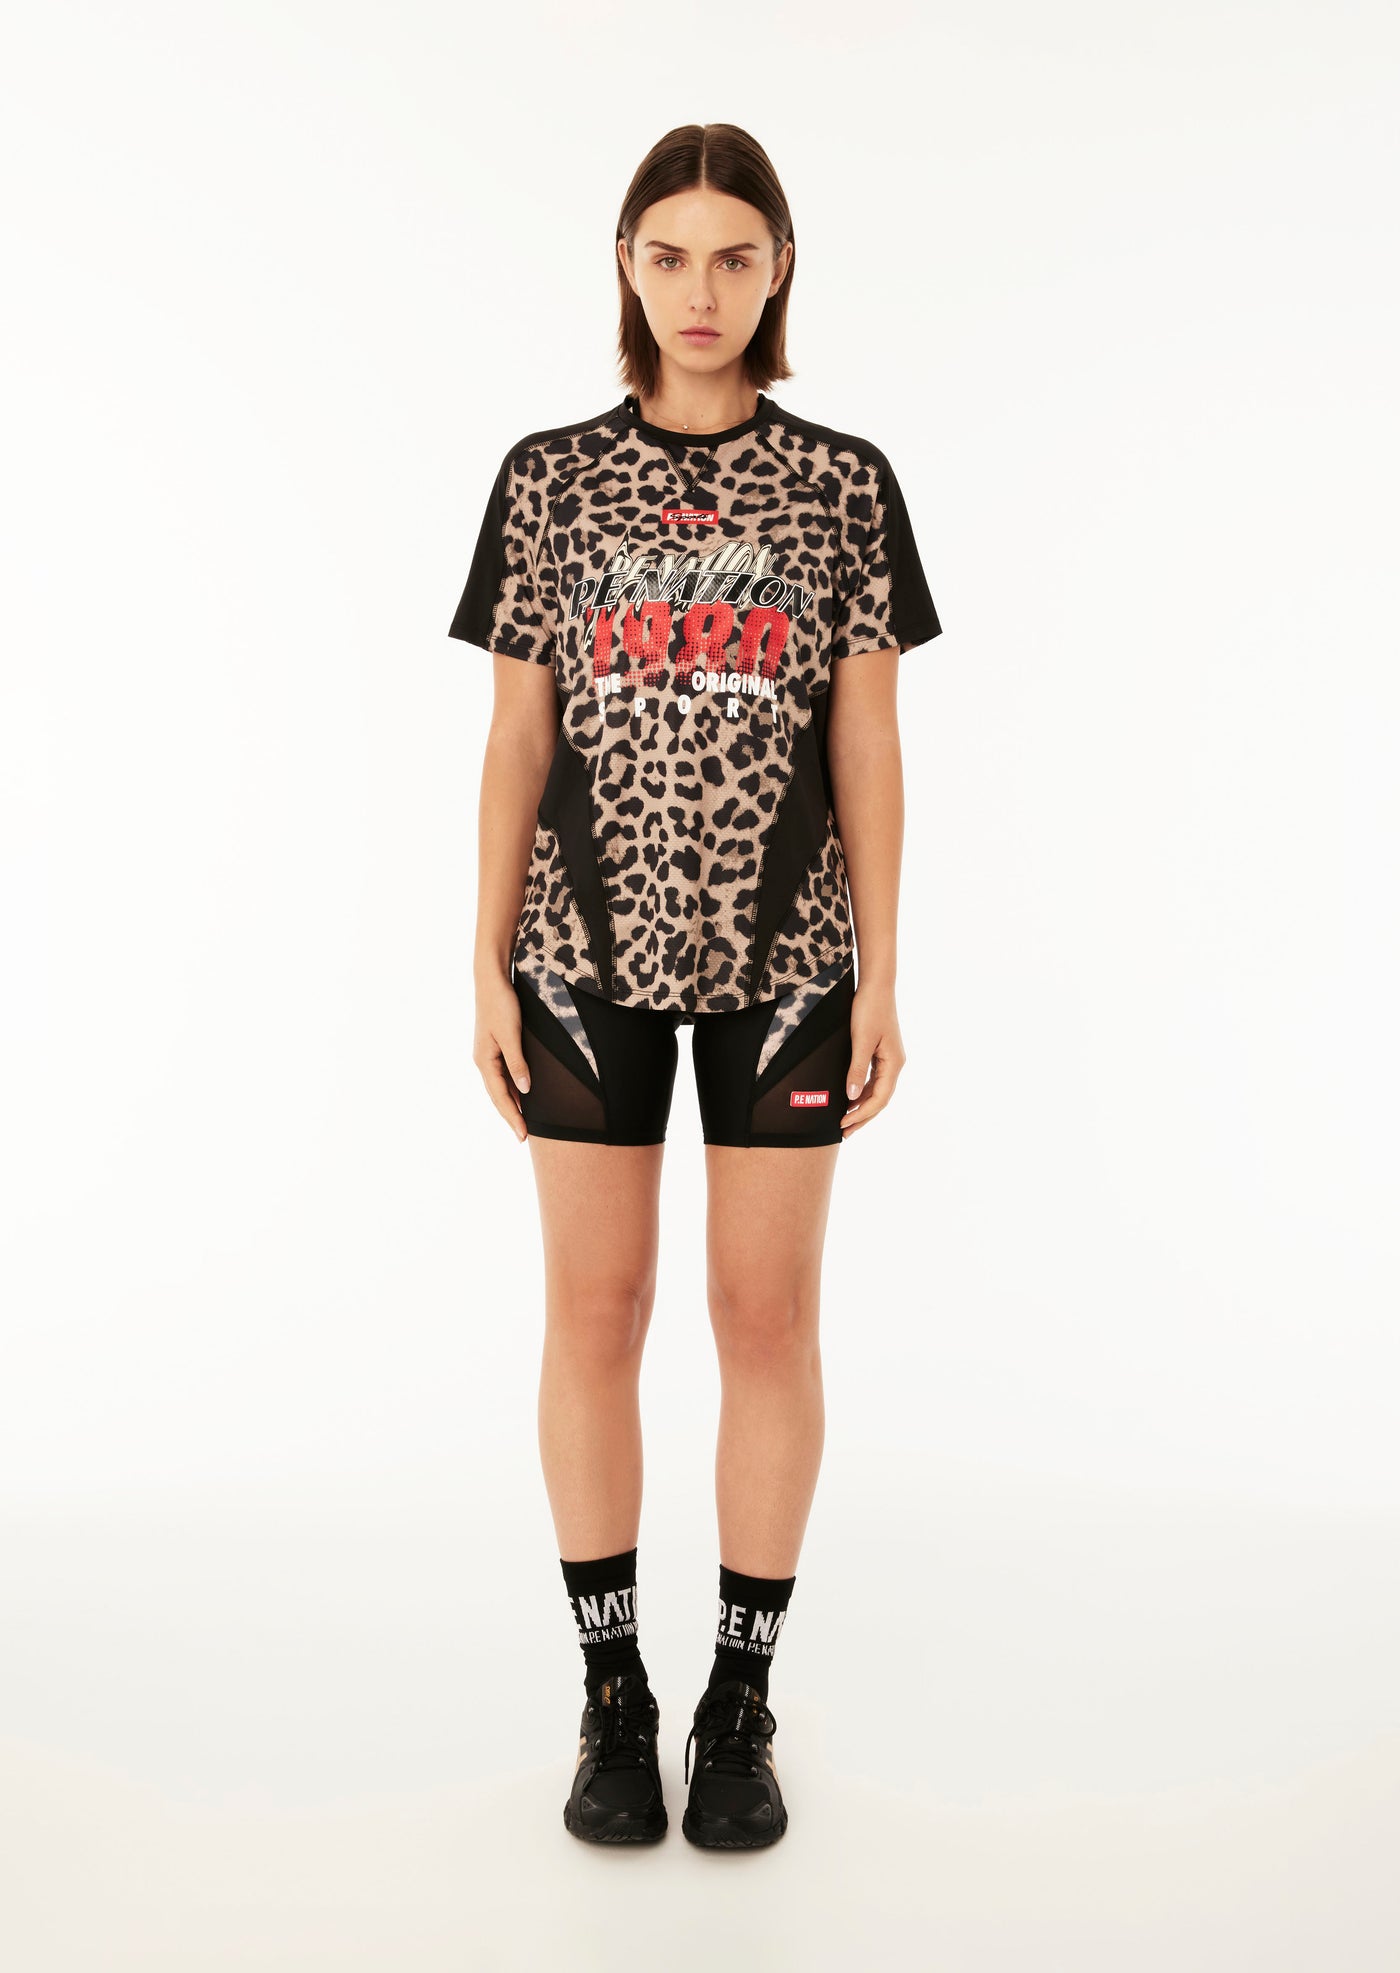 LAP TIME AIR FORM SS TEE IN ANIMAL PRINT